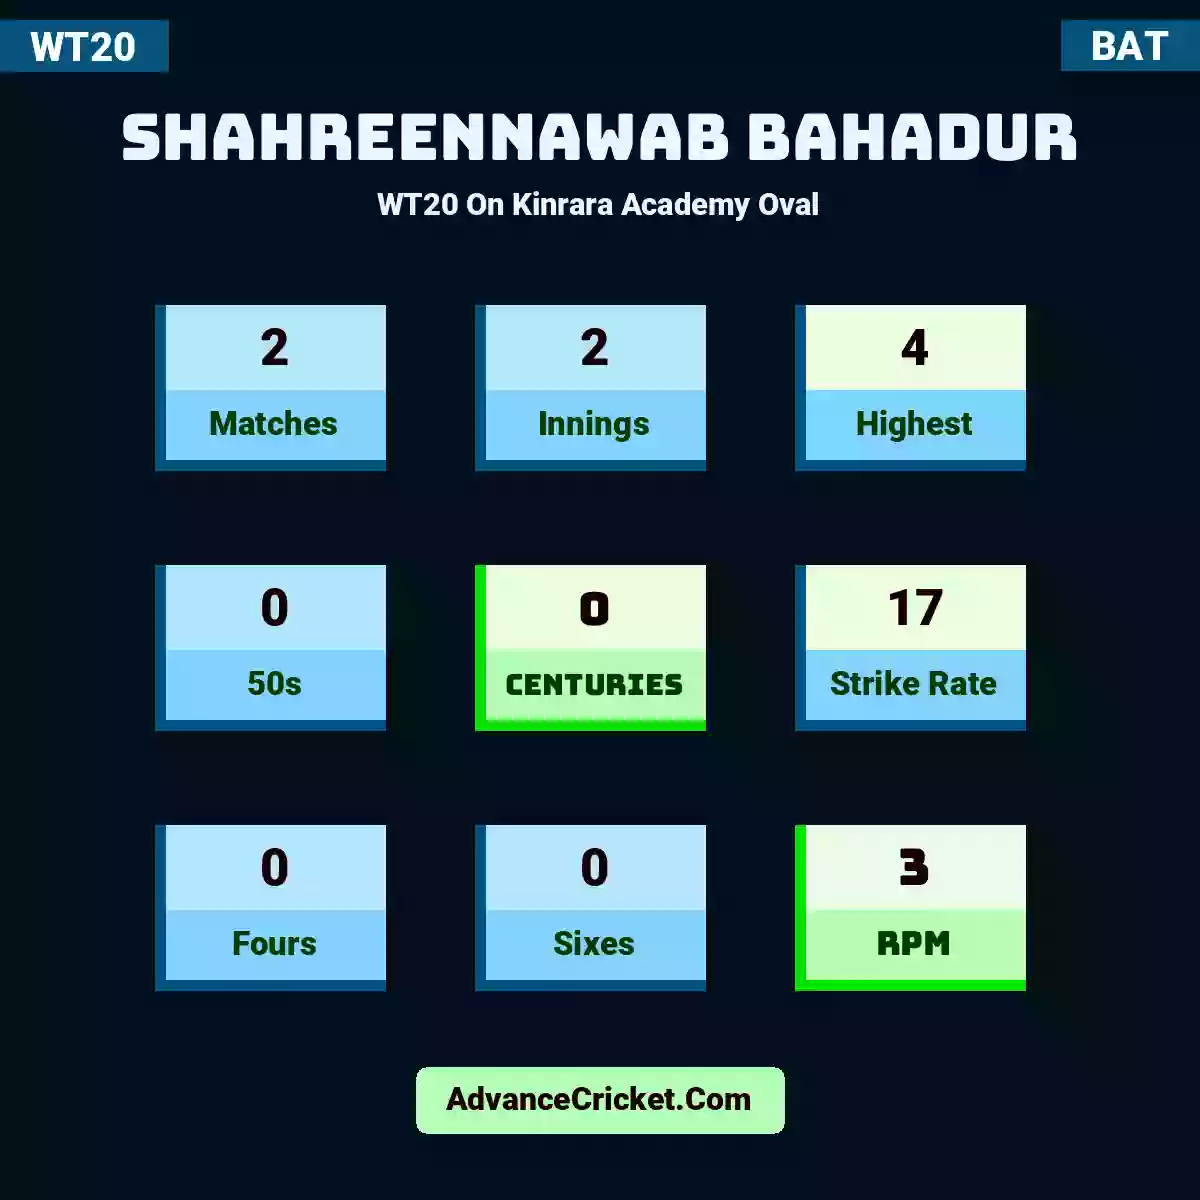 Shahreennawab Bahadur WT20  On Kinrara Academy Oval, Shahreennawab Bahadur played 2 matches, scored 4 runs as highest, 0 half-centuries, and 0 centuries, with a strike rate of 17. S.Bahadur hit 0 fours and 0 sixes, with an RPM of 3.